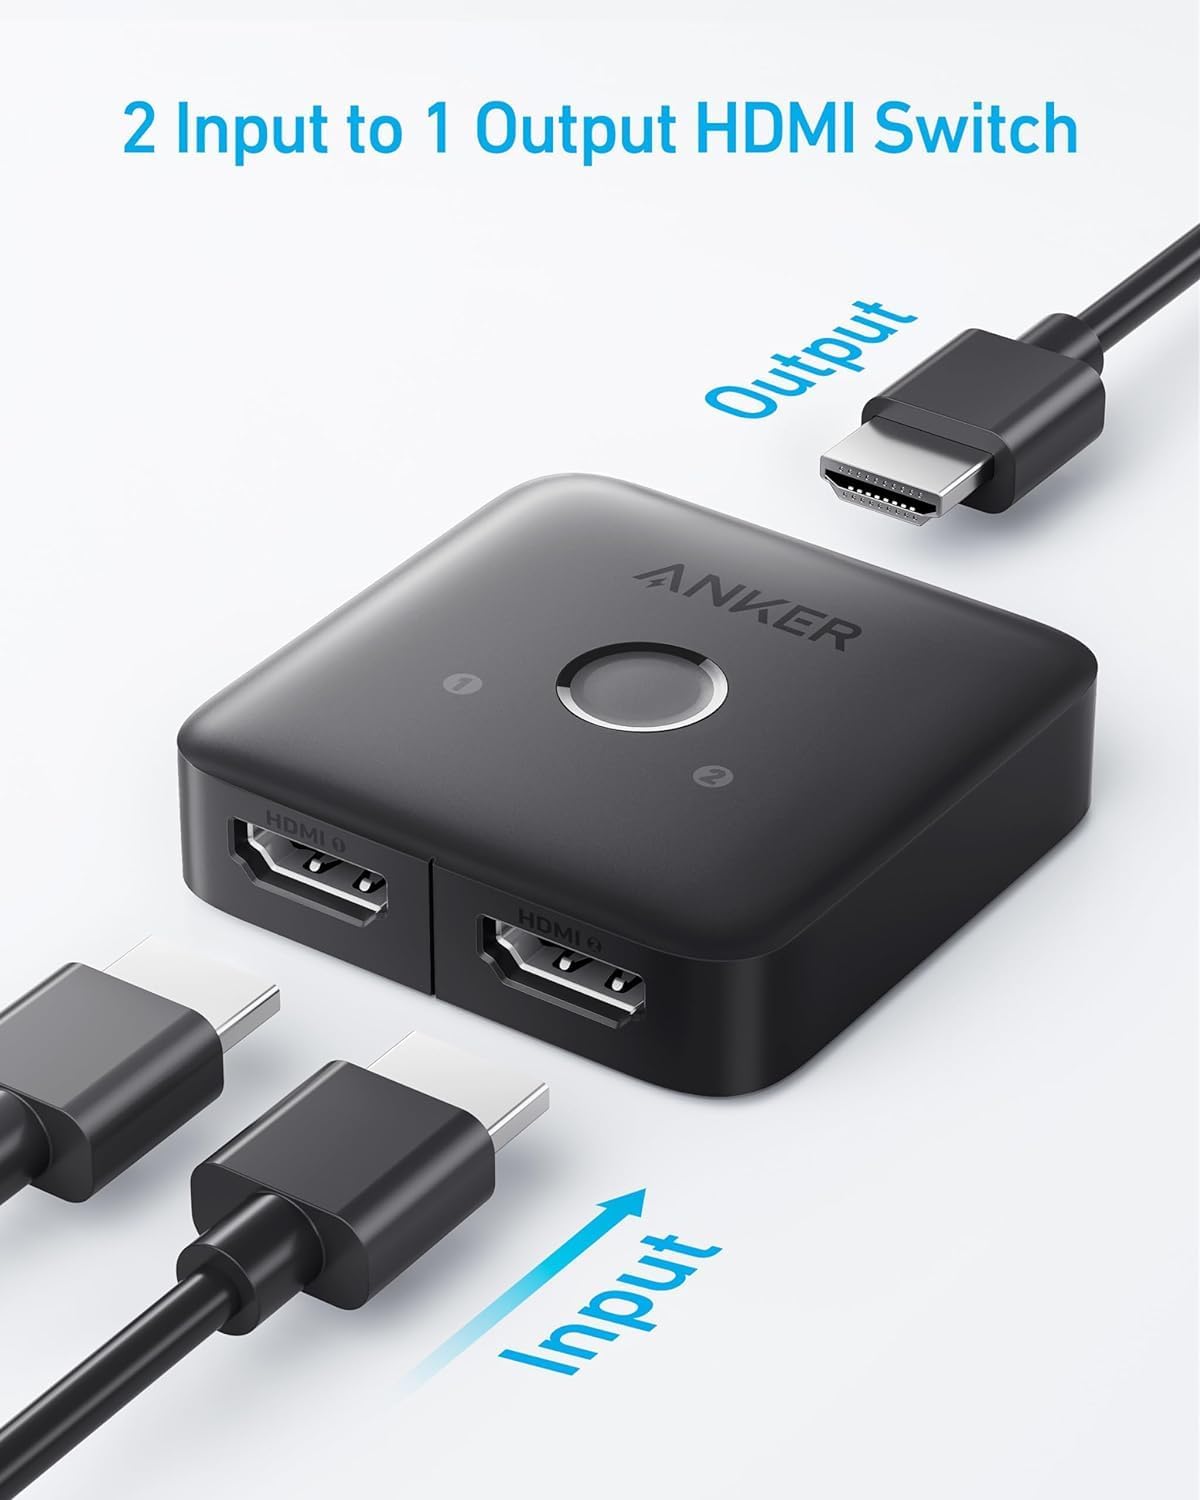 Anker HDMI Switch, 4K@60Hz Bi-Directional HDMI Switcher, 2 In 1 Out with Smooth Finish, Supports HDR, 3D, Dolby, Compatible with Laptops, PC, Xbox Series, PS5 / PS4, Projector, and More